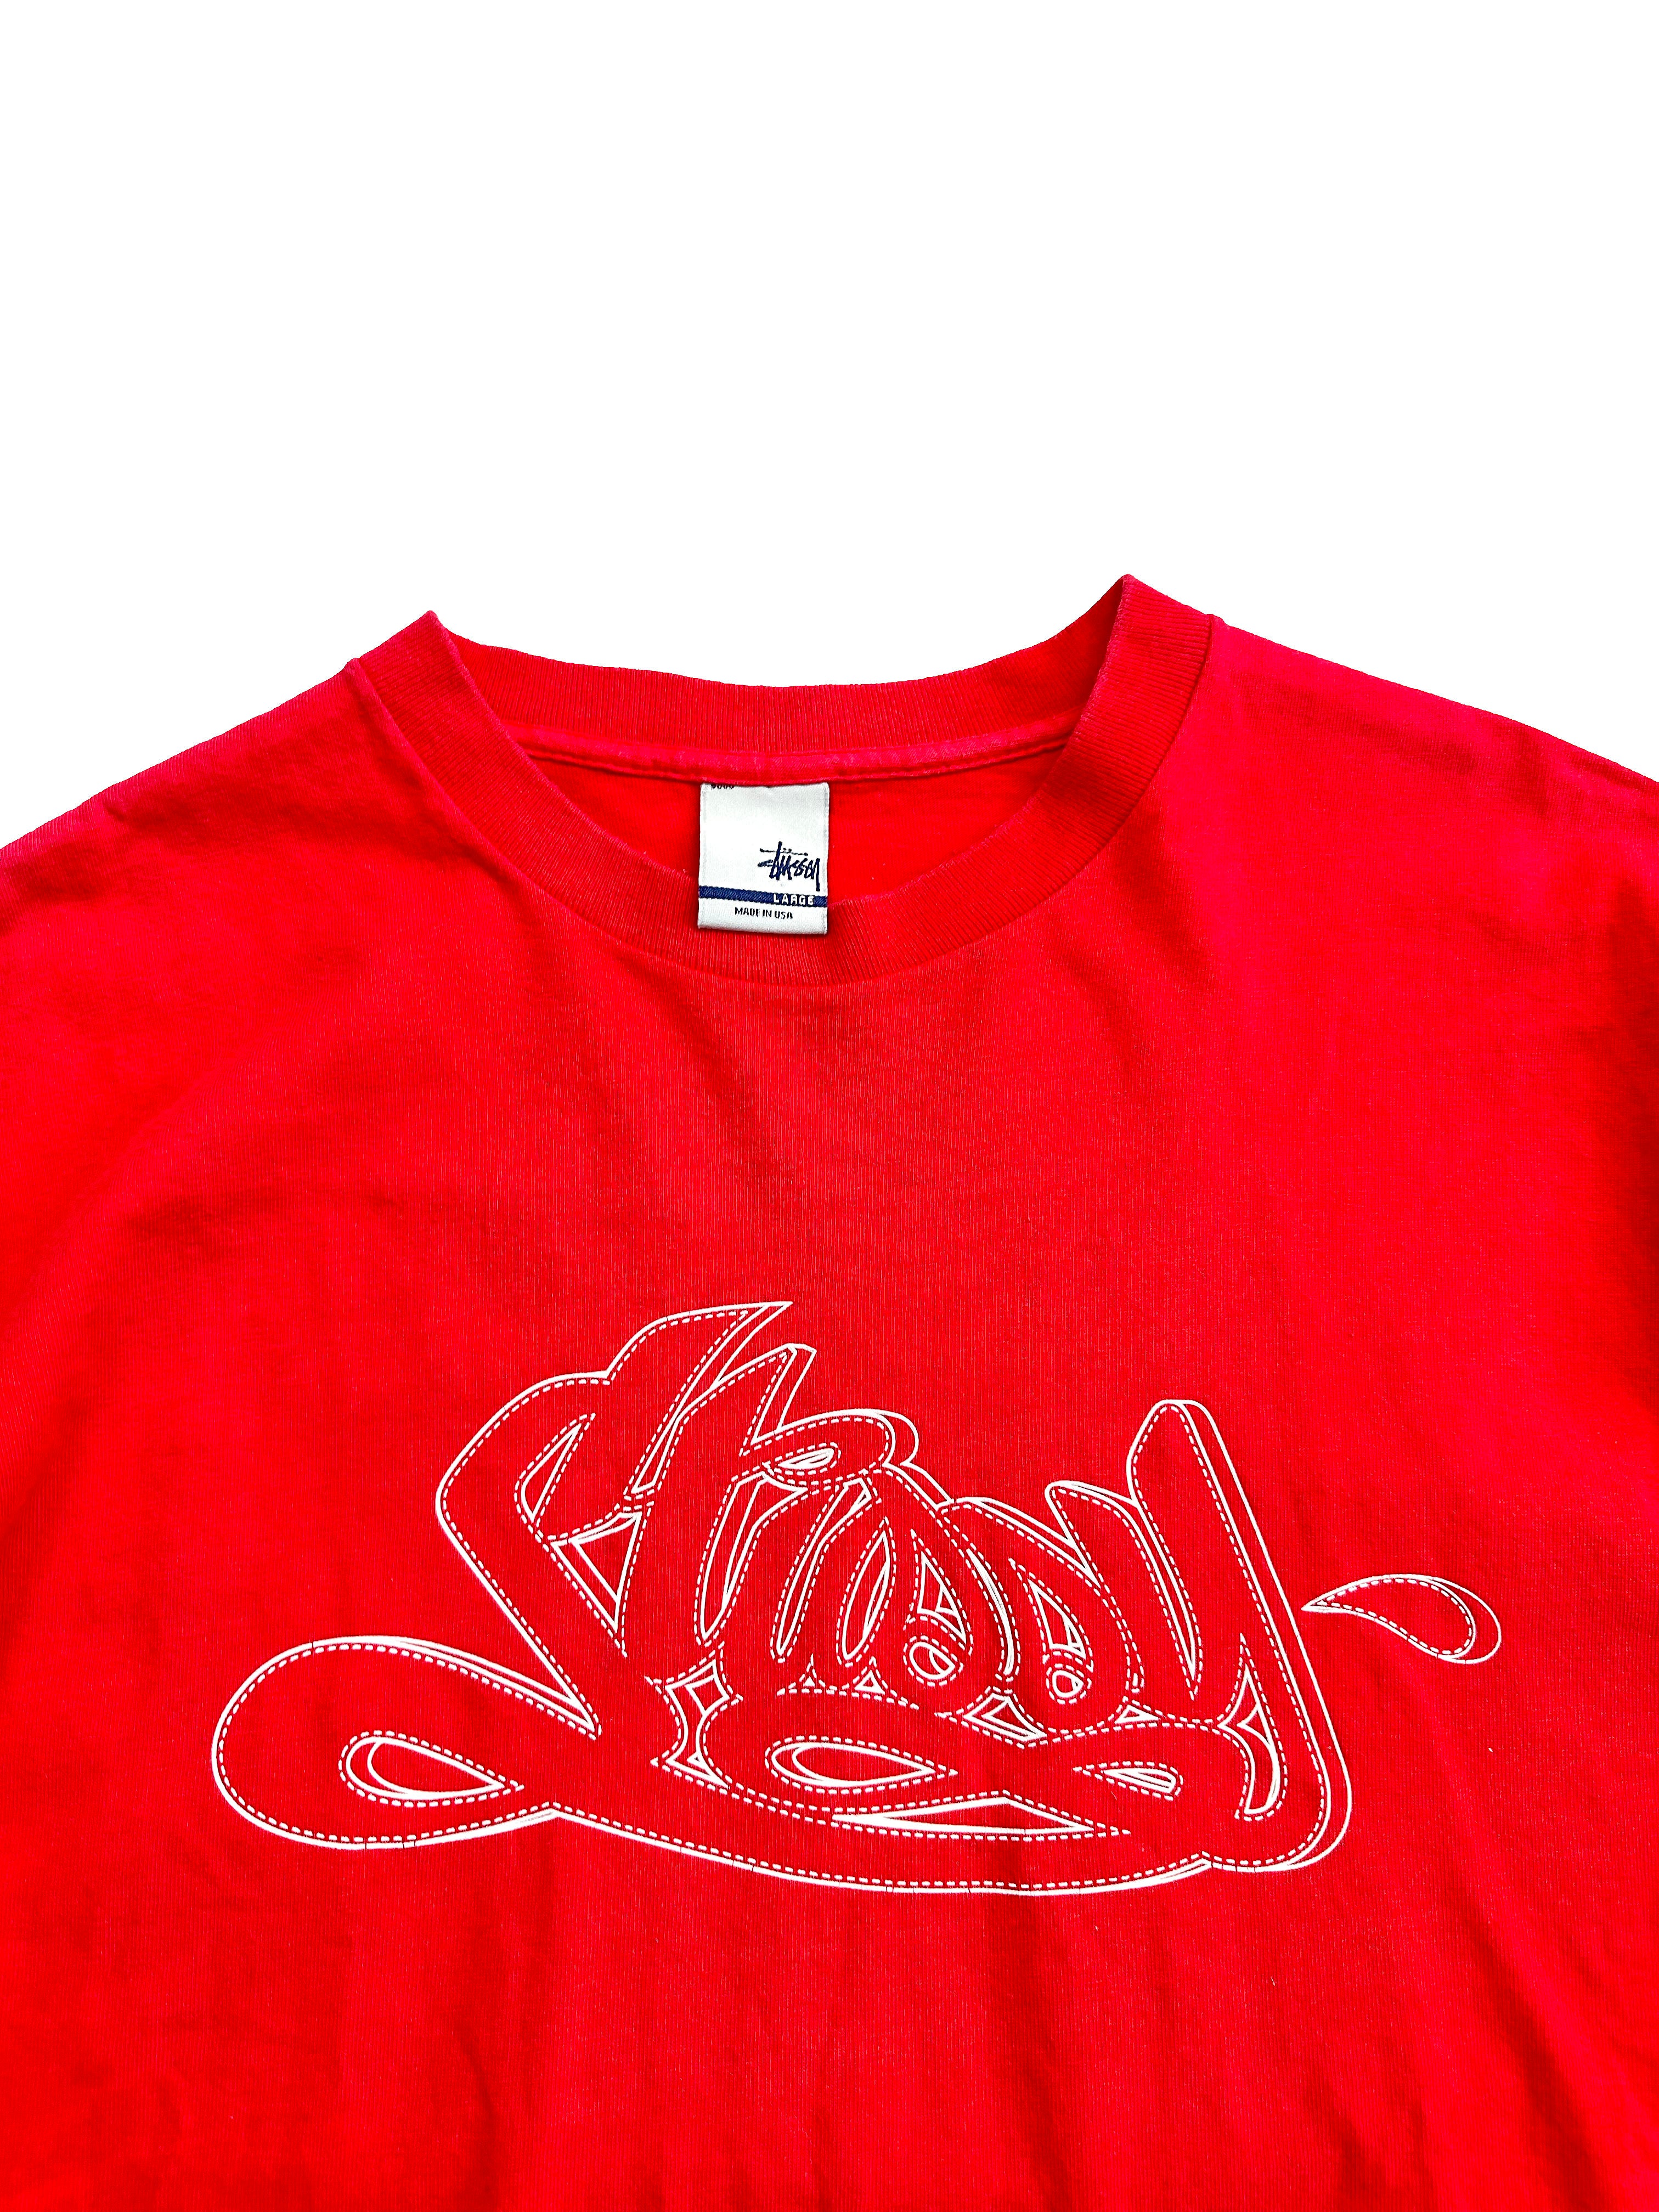 Stussy Red Spell Out T-shirt 00's